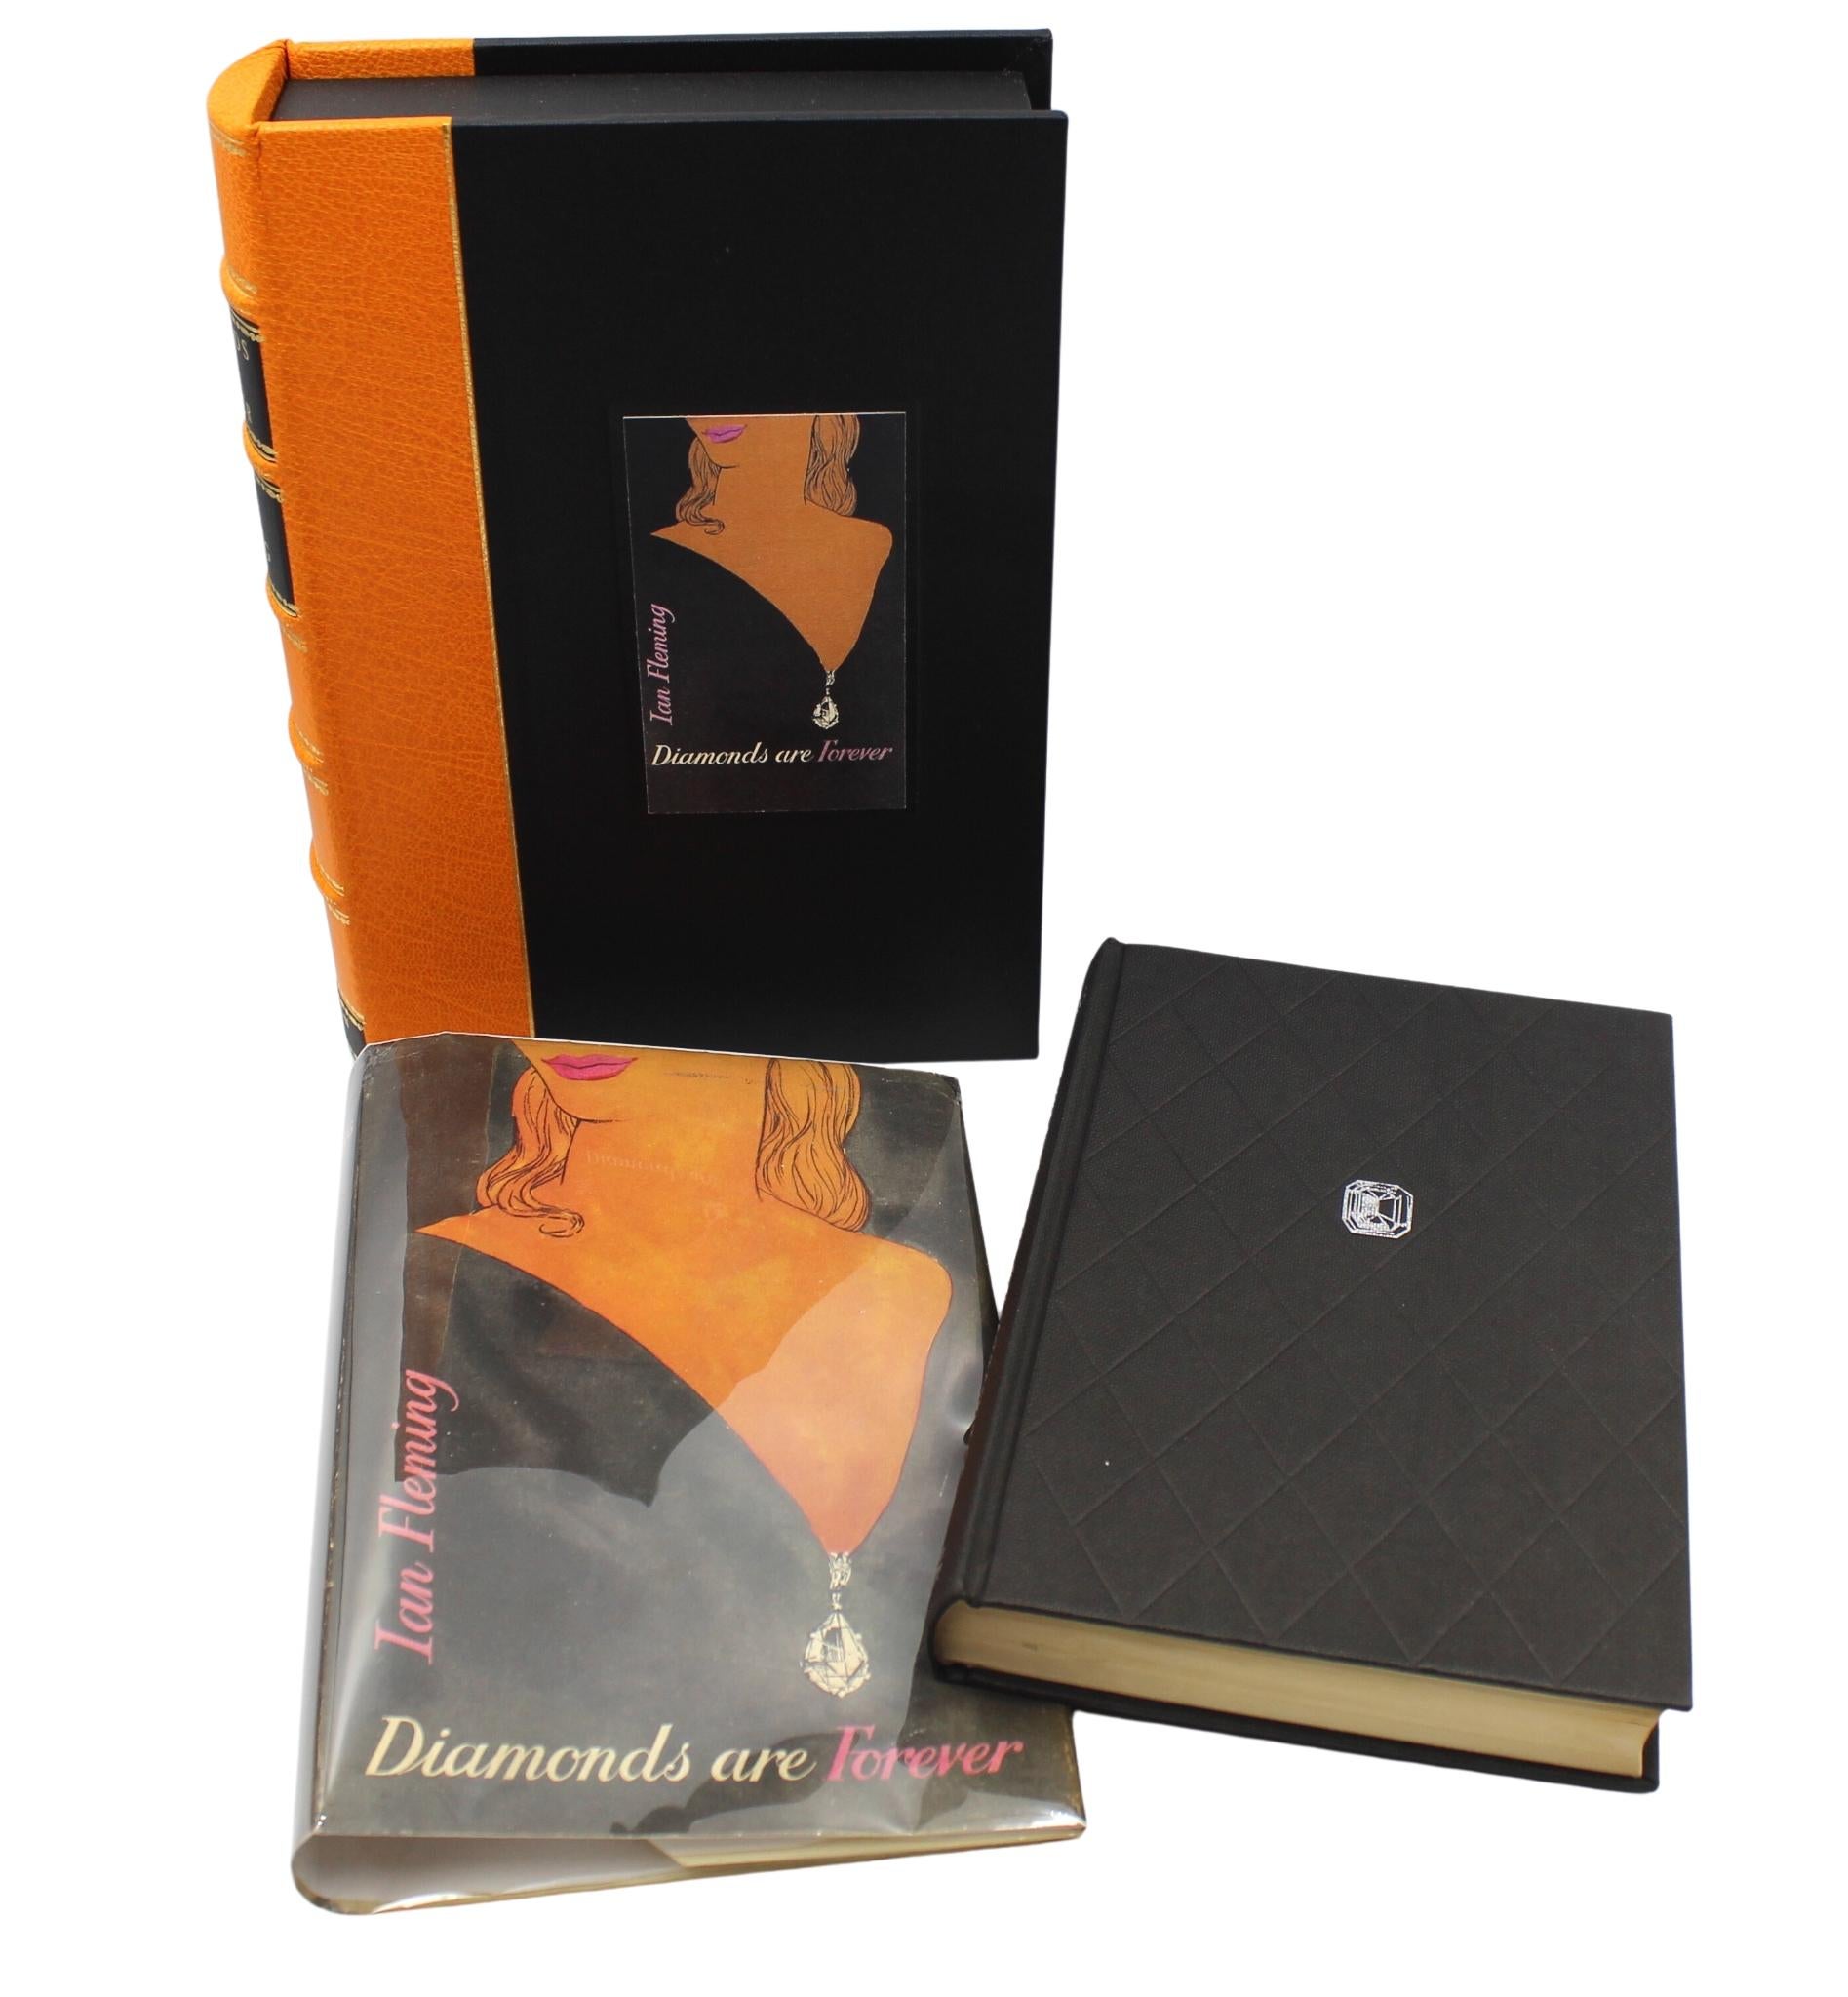 Diamonds are Forever by Ian Fleming, First Edition in Original Dust Jacket, 1956 1